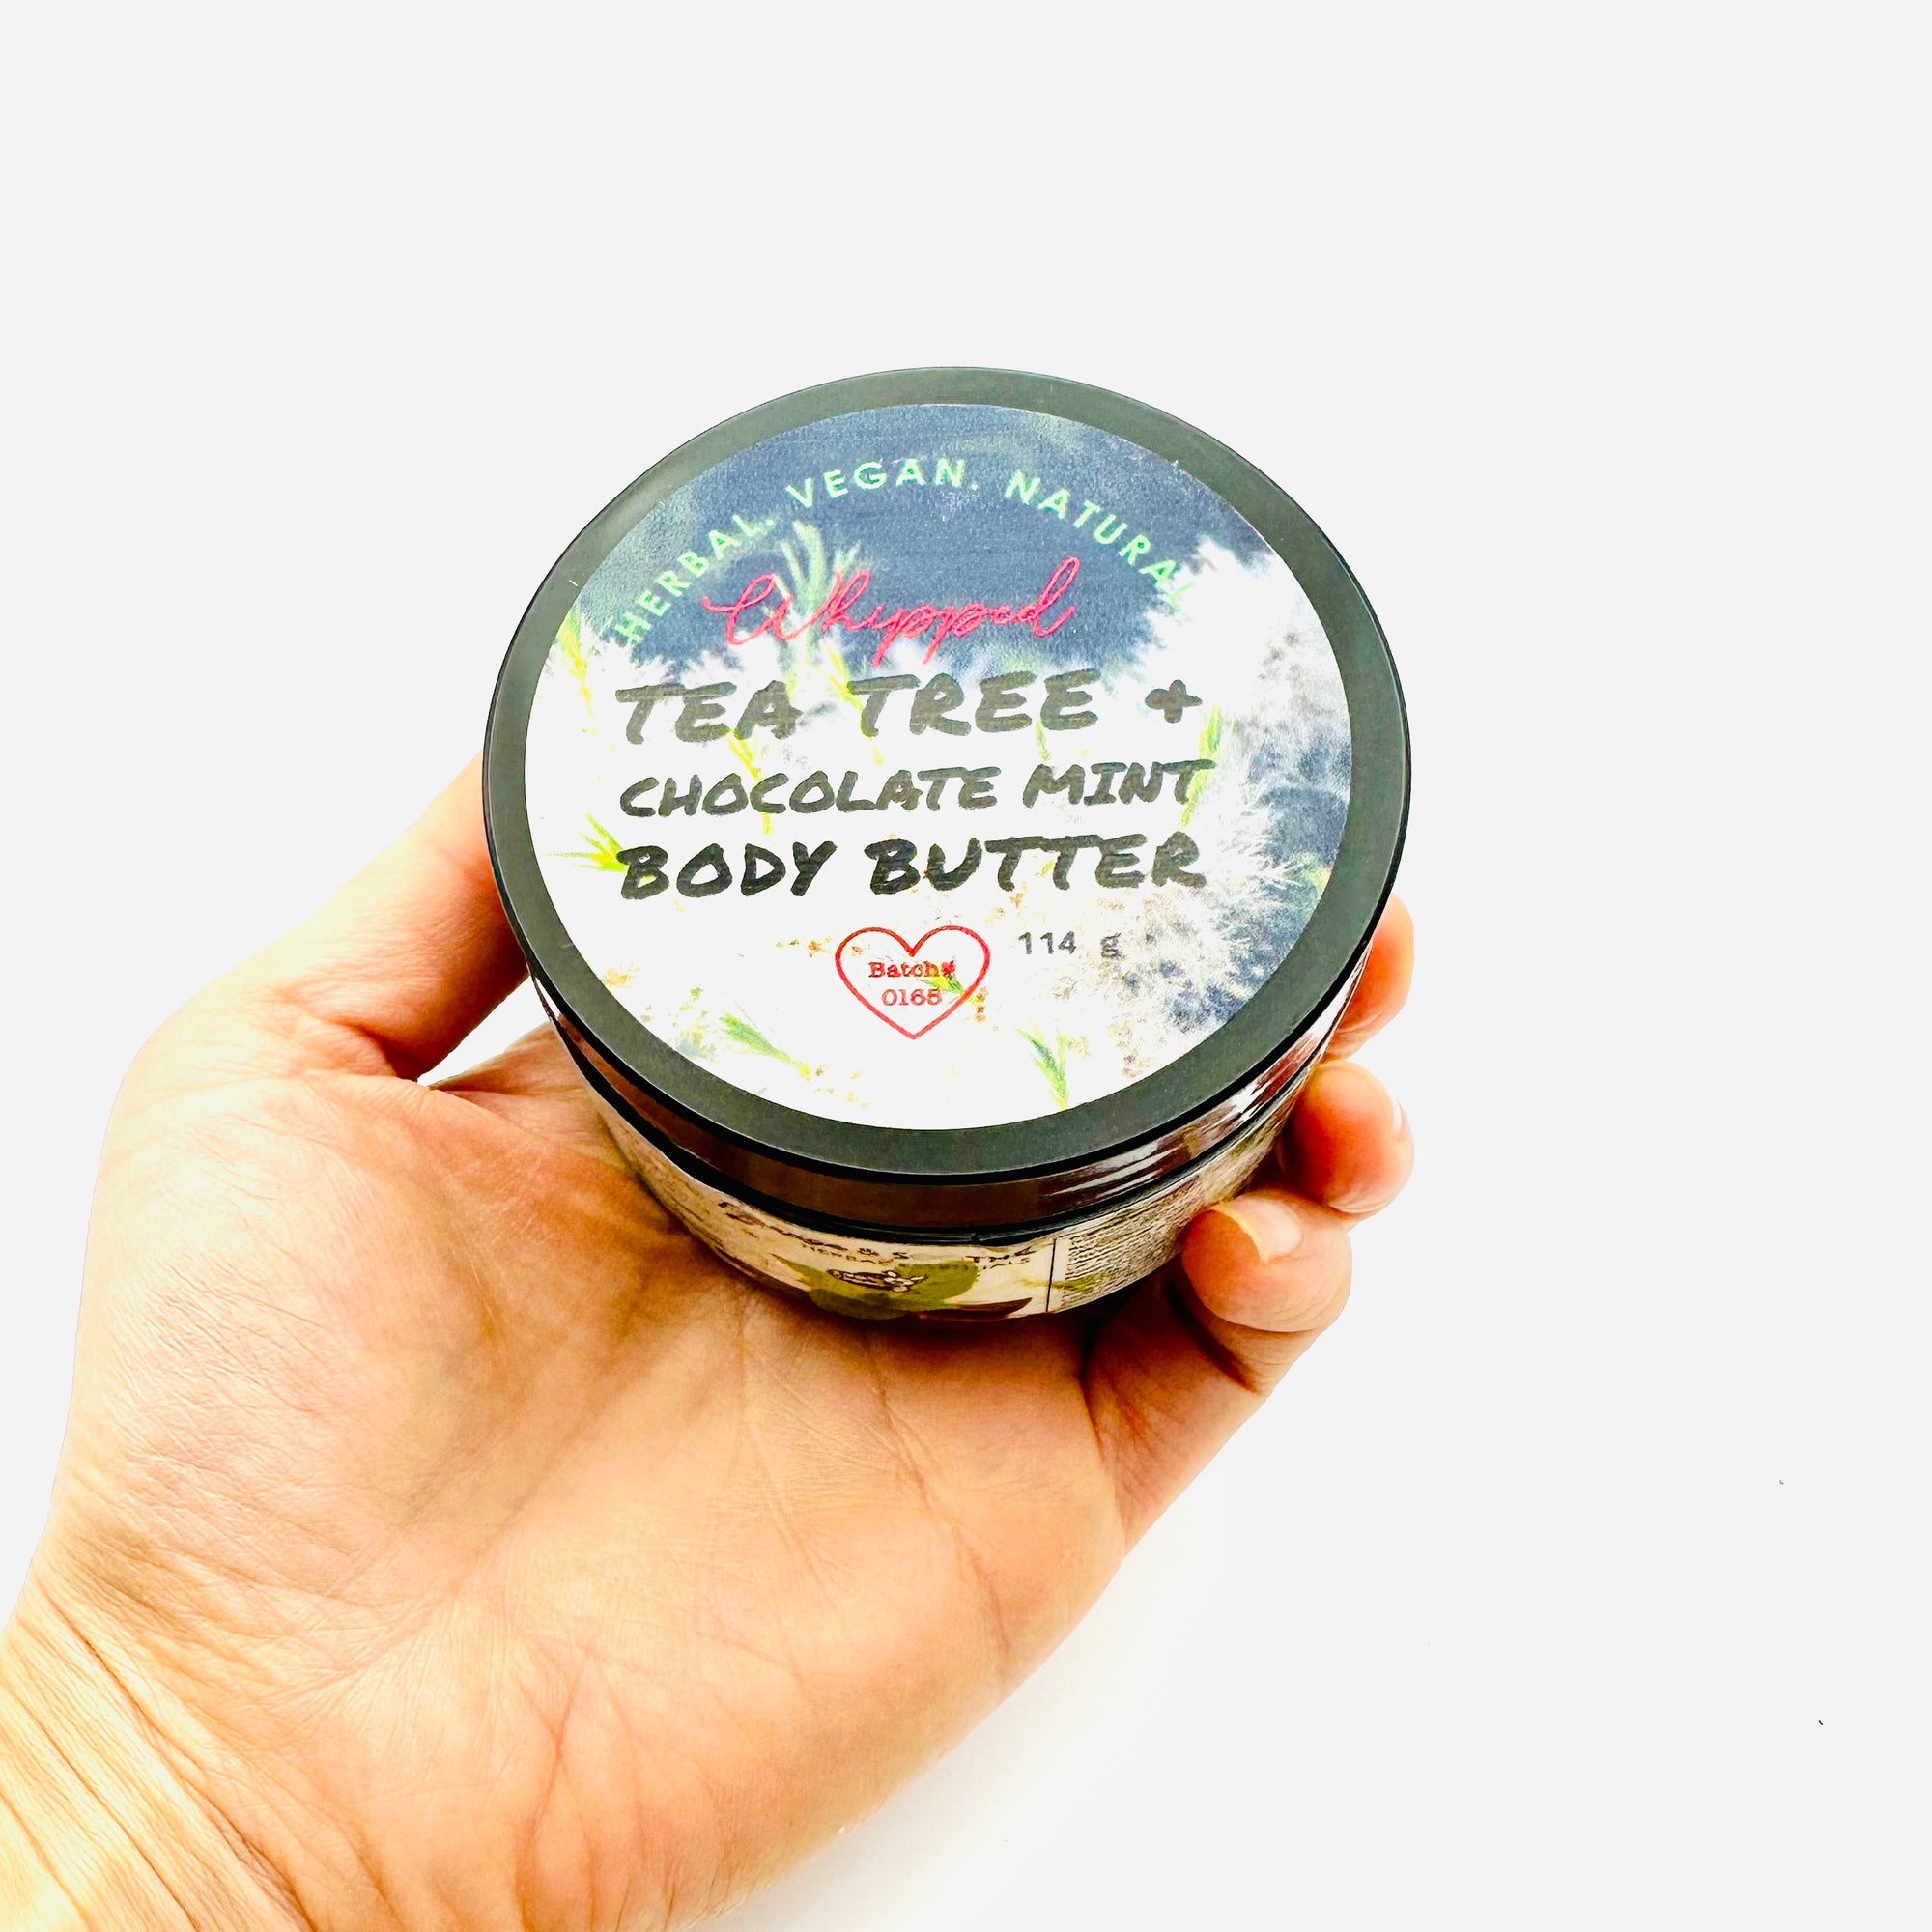 Whipped Tea Tree & Chocolate Mint Body Butter